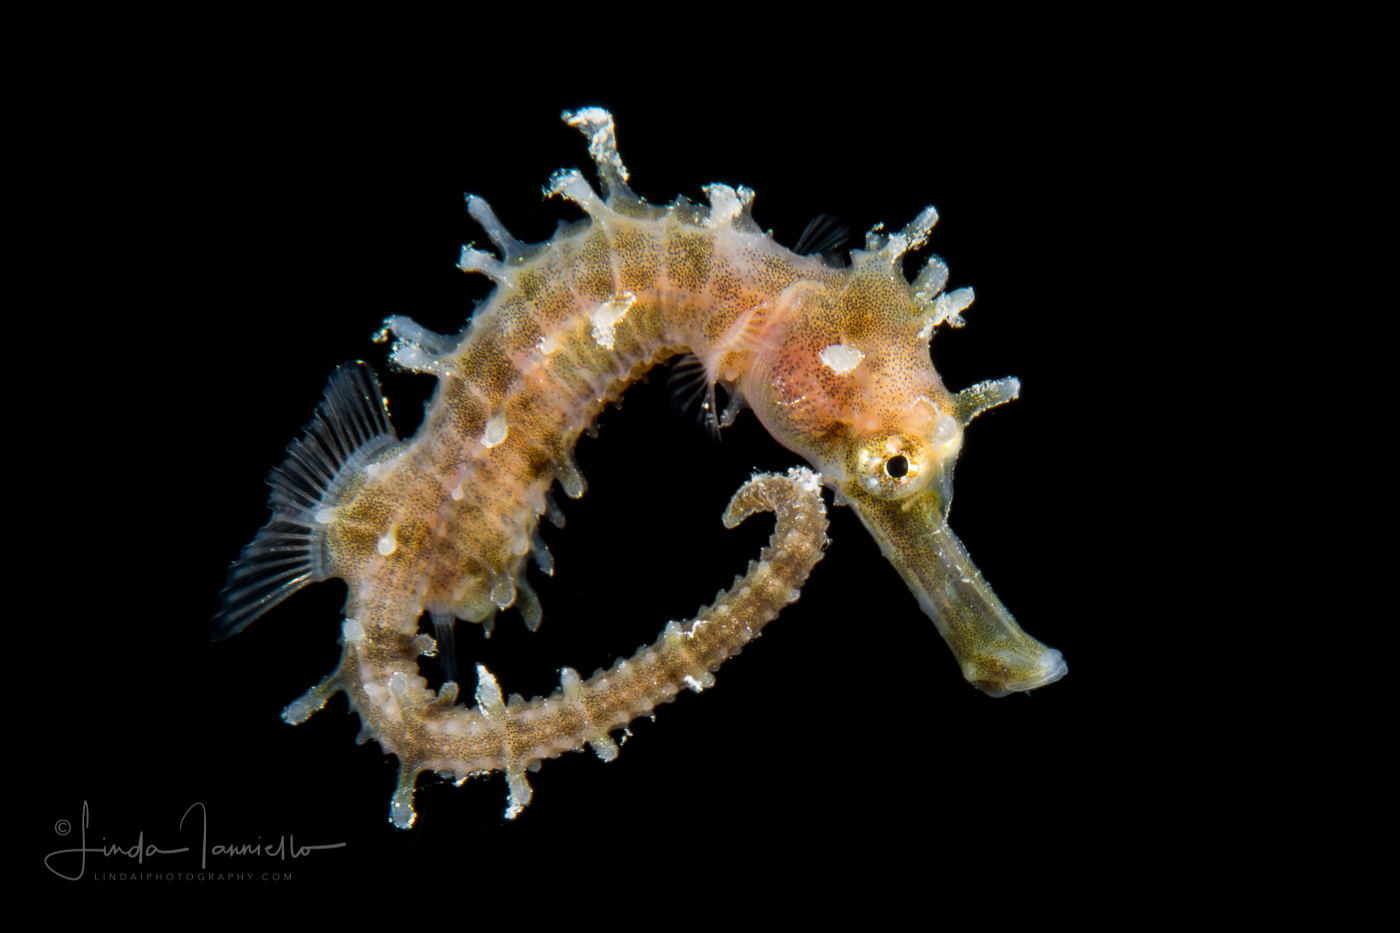 Seahorse - Lined - Syngnathidae Family - Hippocampus erectus